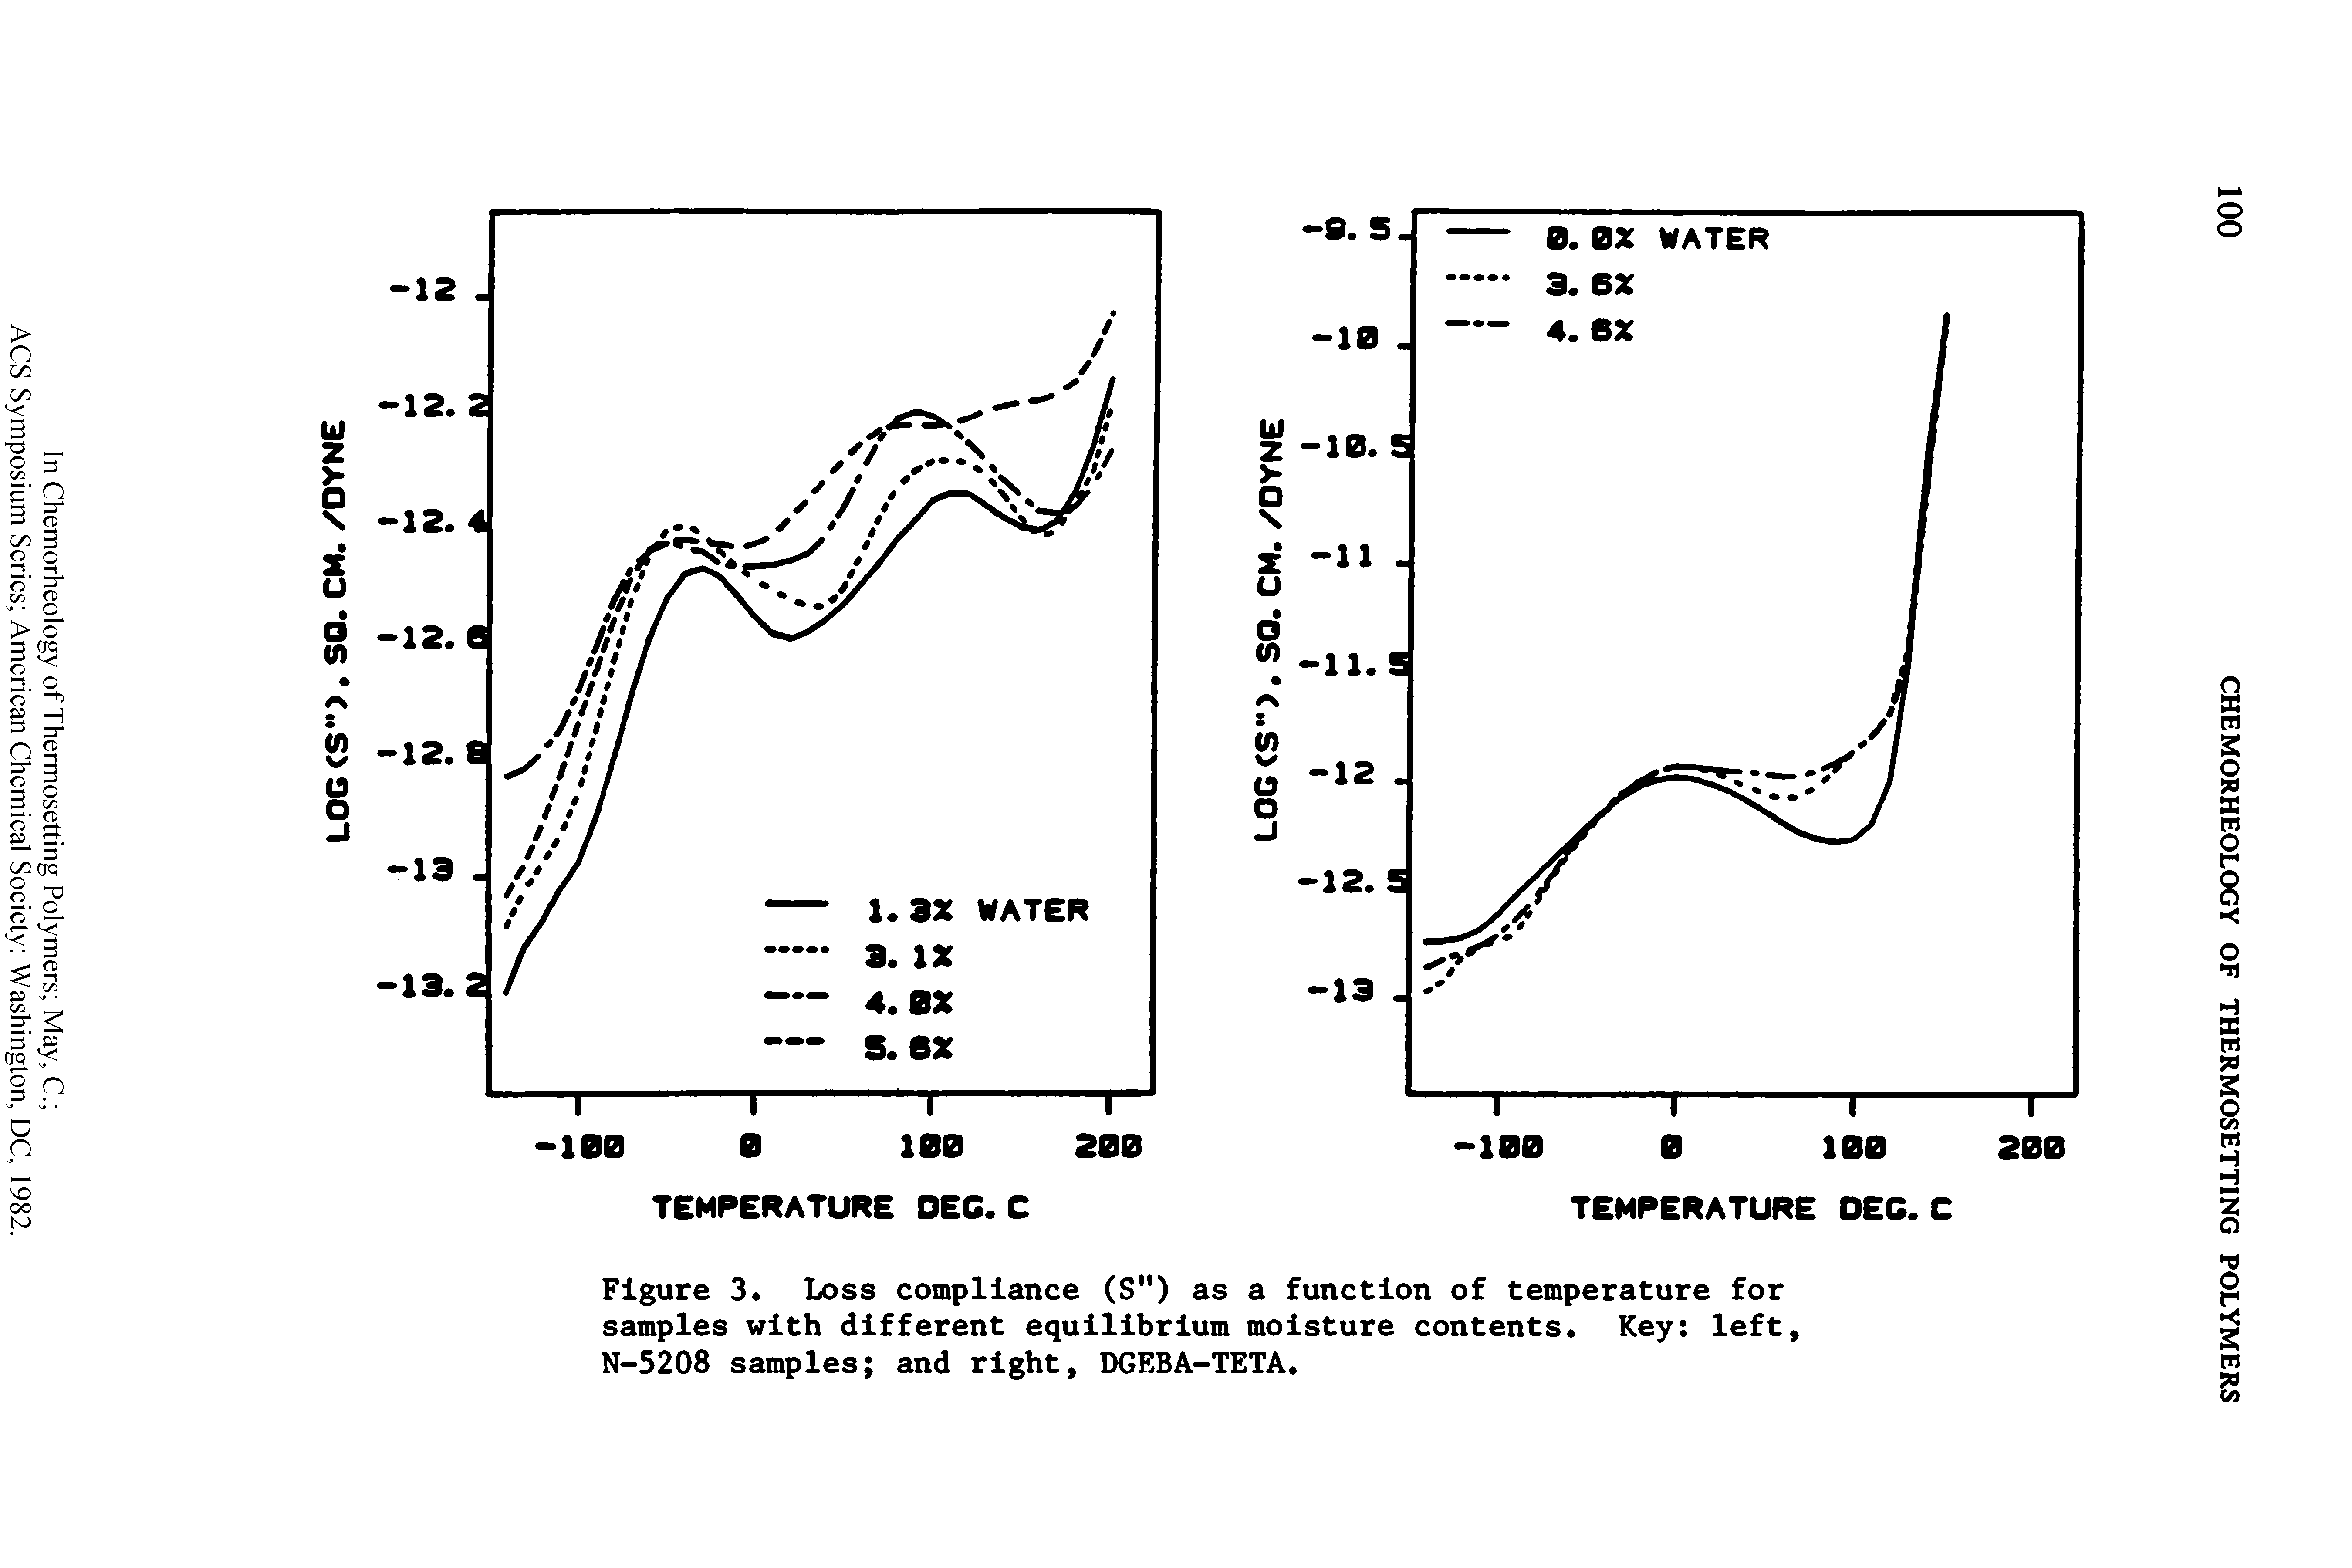 Figure 3 Loss compliance (S") as a function of temperature for samples with different equilibrium moisture contents Key left, N-5208 samples and right, DGEBA-TETA.